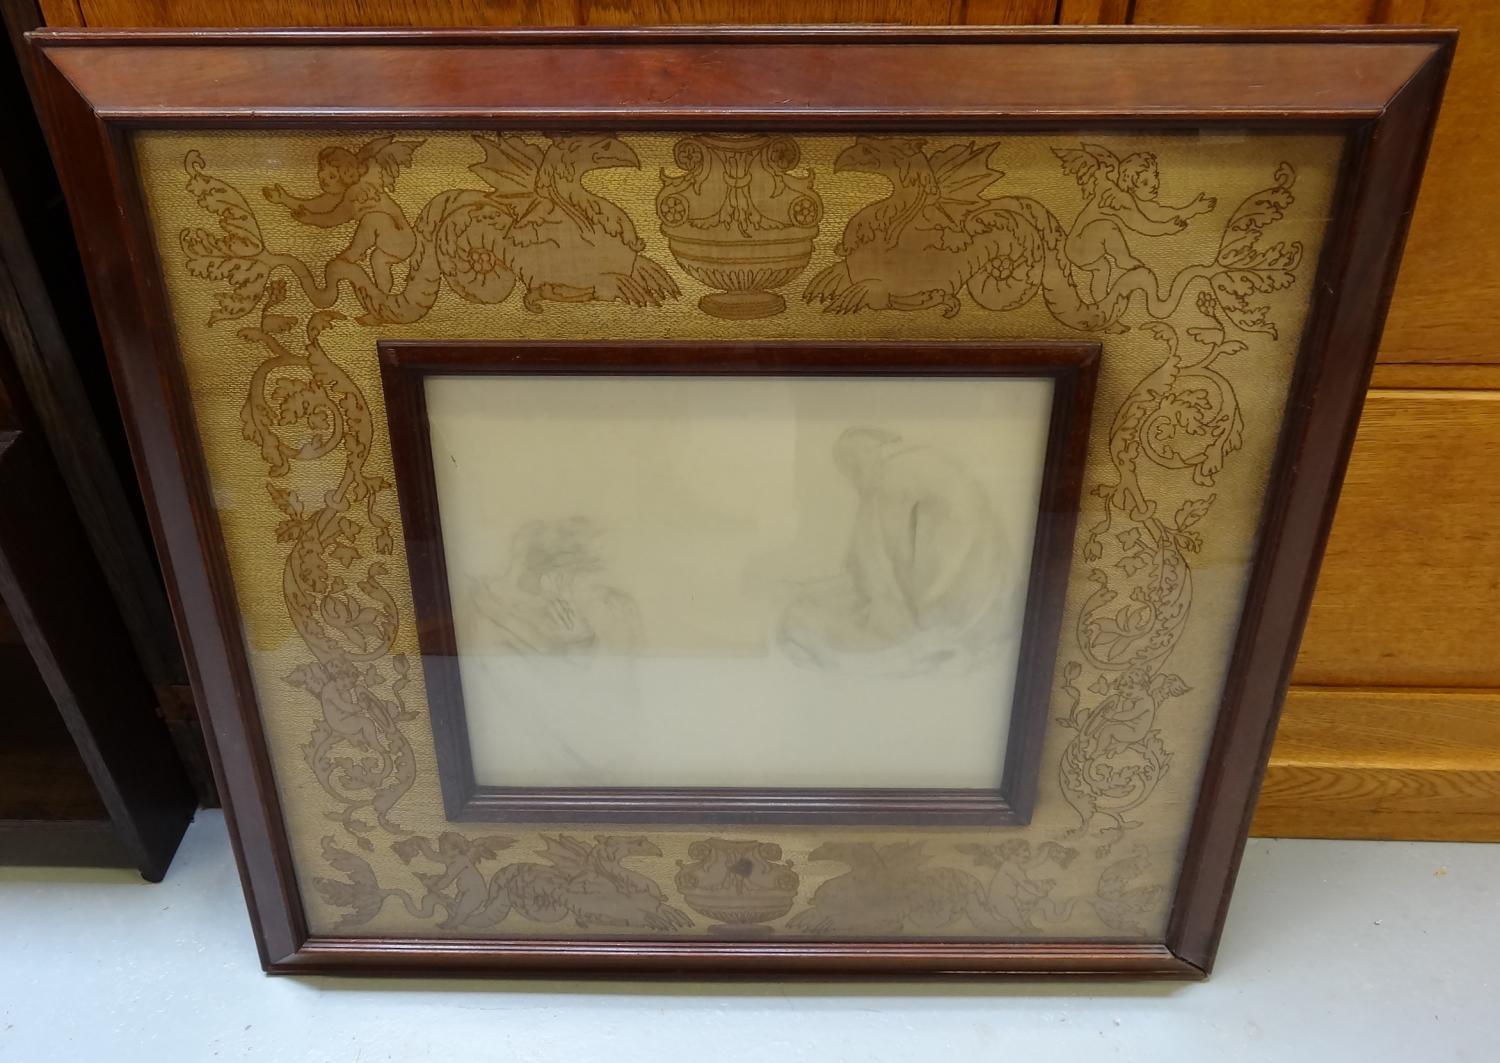 Rossetti frame with pencil drawing